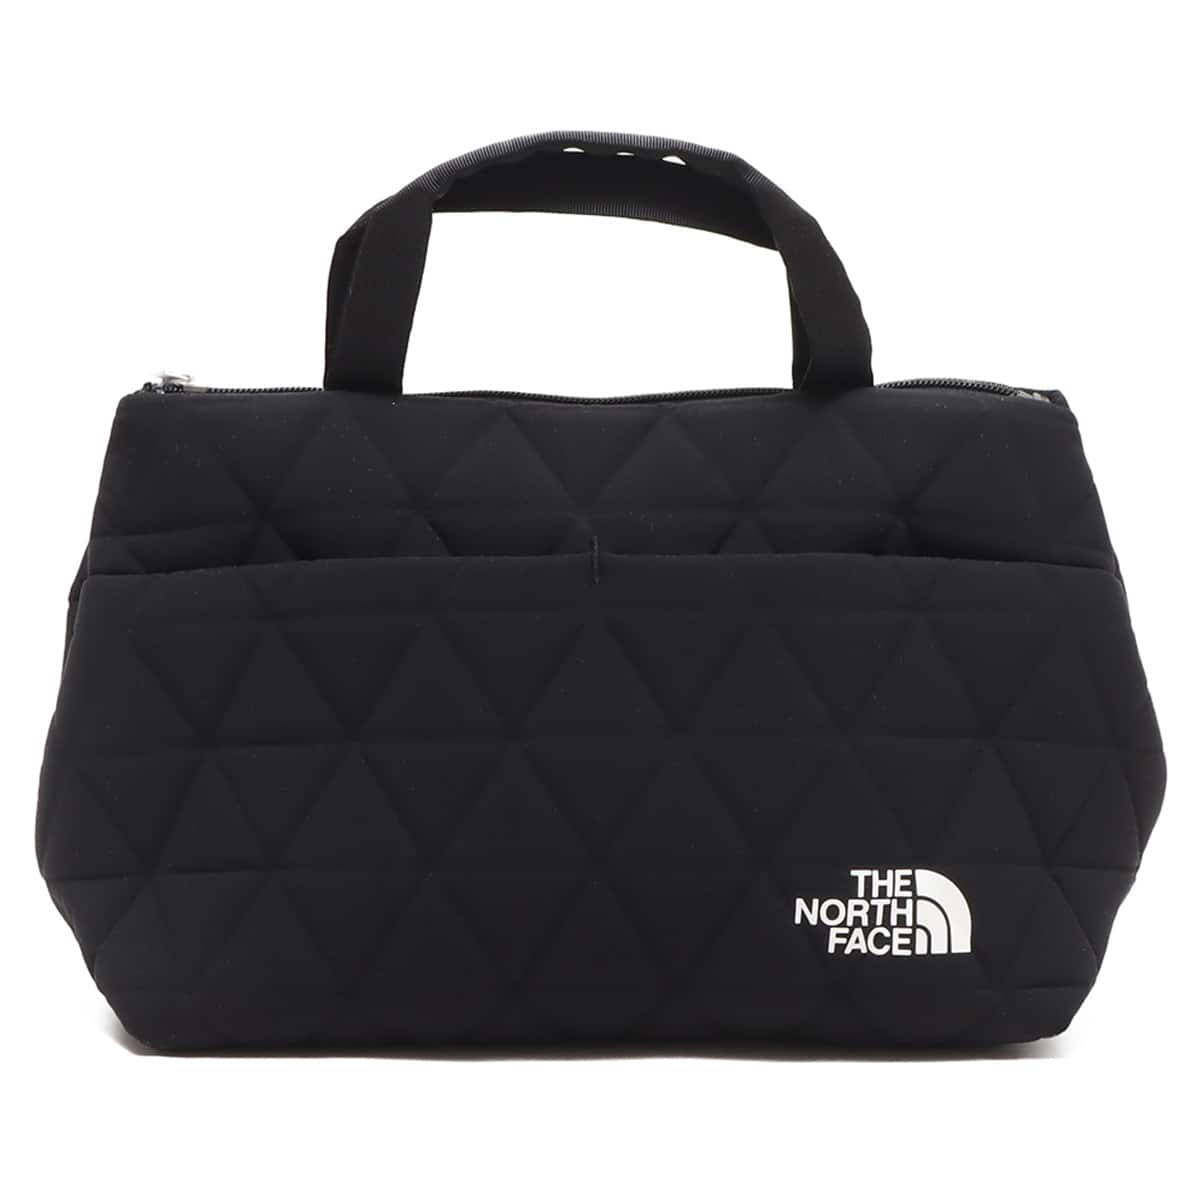 THE NORTH FACE GEOFACE BOX TOTE BLACK 24SS-I